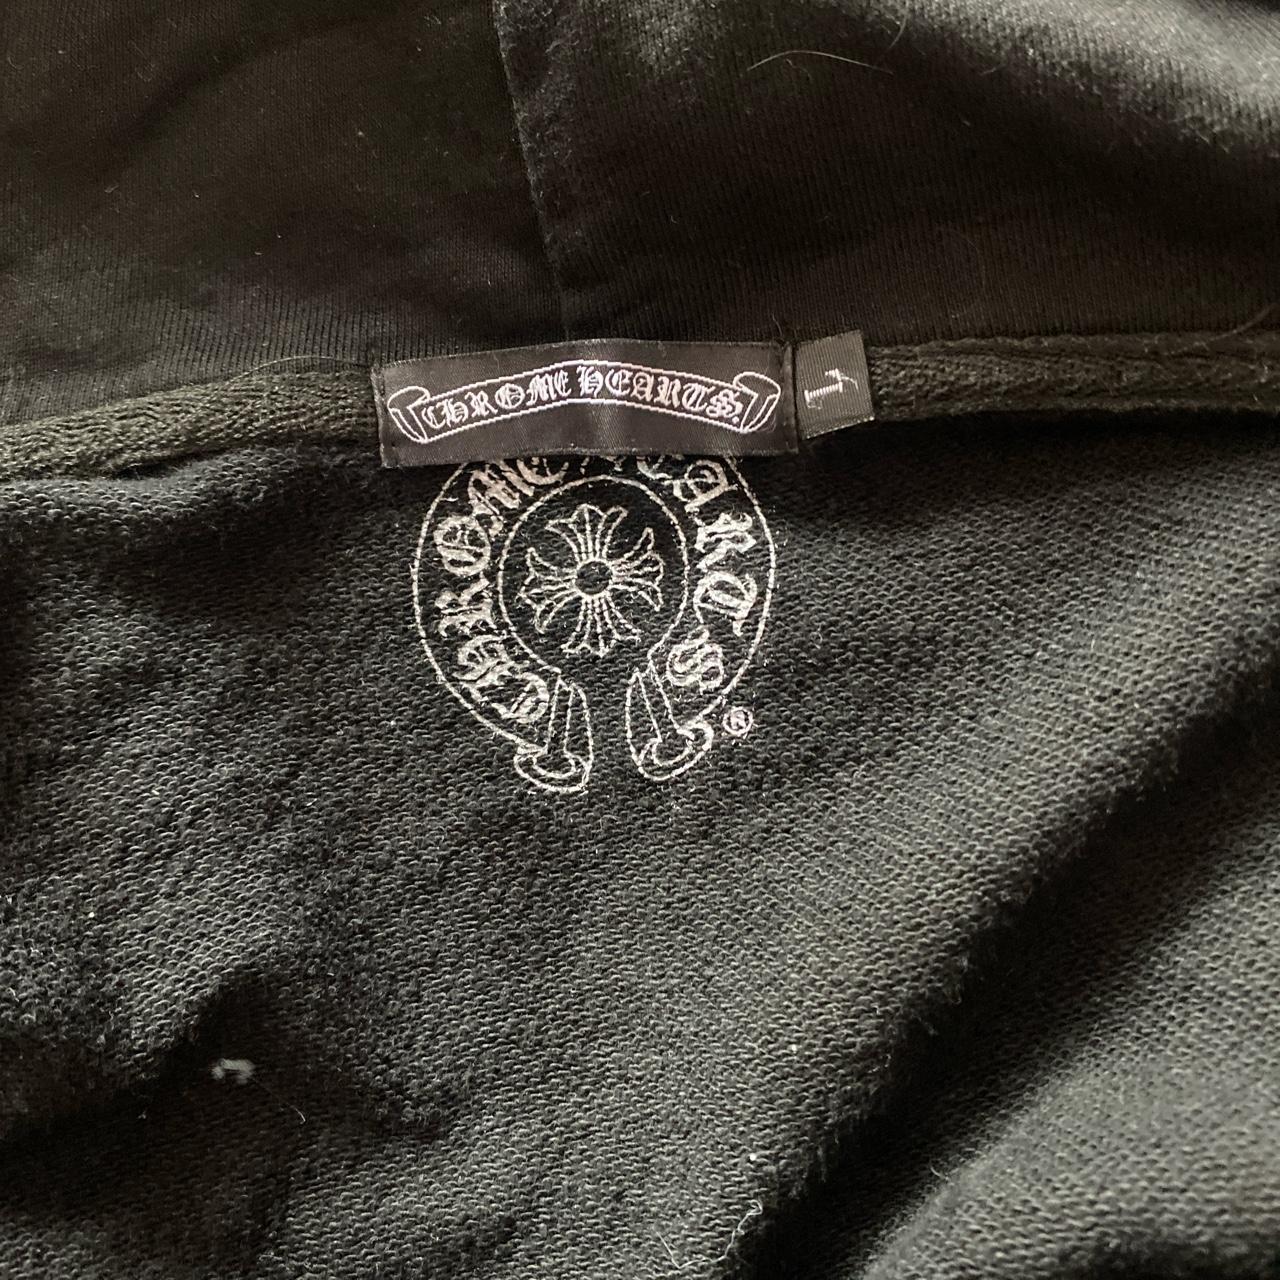 Chrome hearts jumper, Size L but fits more like an M... - Depop